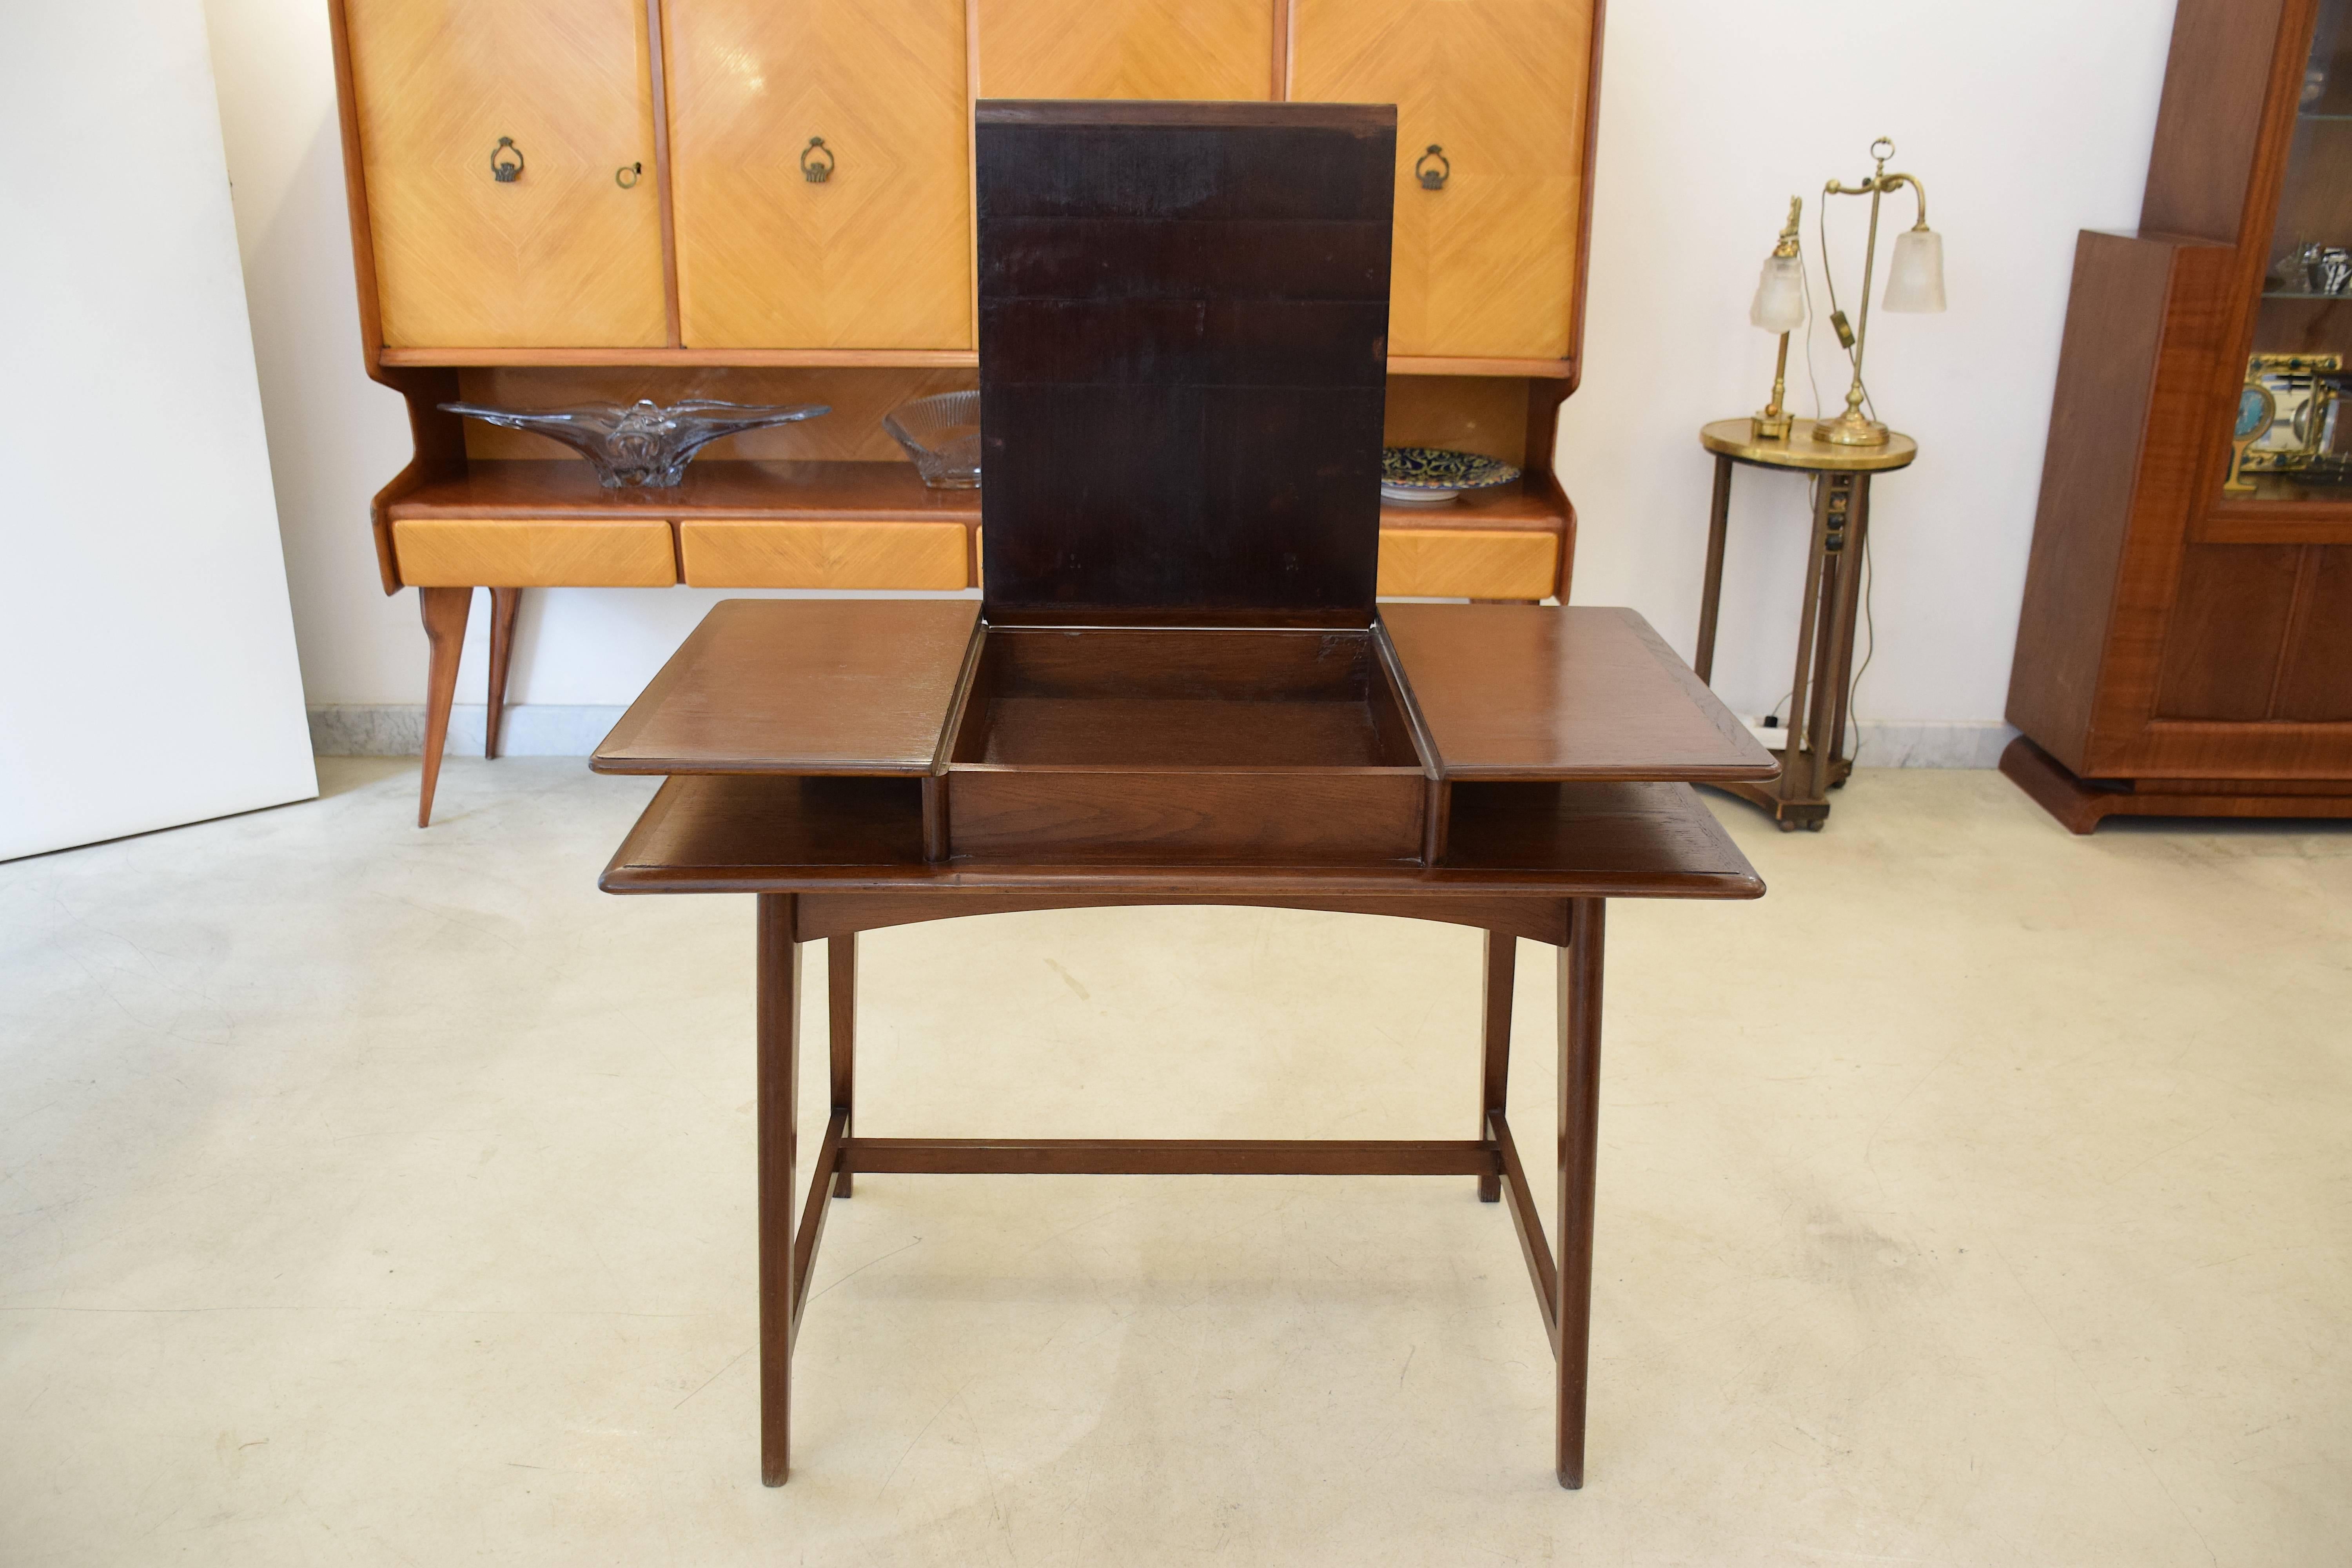 20th century vintage desk manufactured in France between the 1950s and 1960s composed of a wooden oak structure with a central flip-top storage space and two layered design for even more storage.
Restored condition.